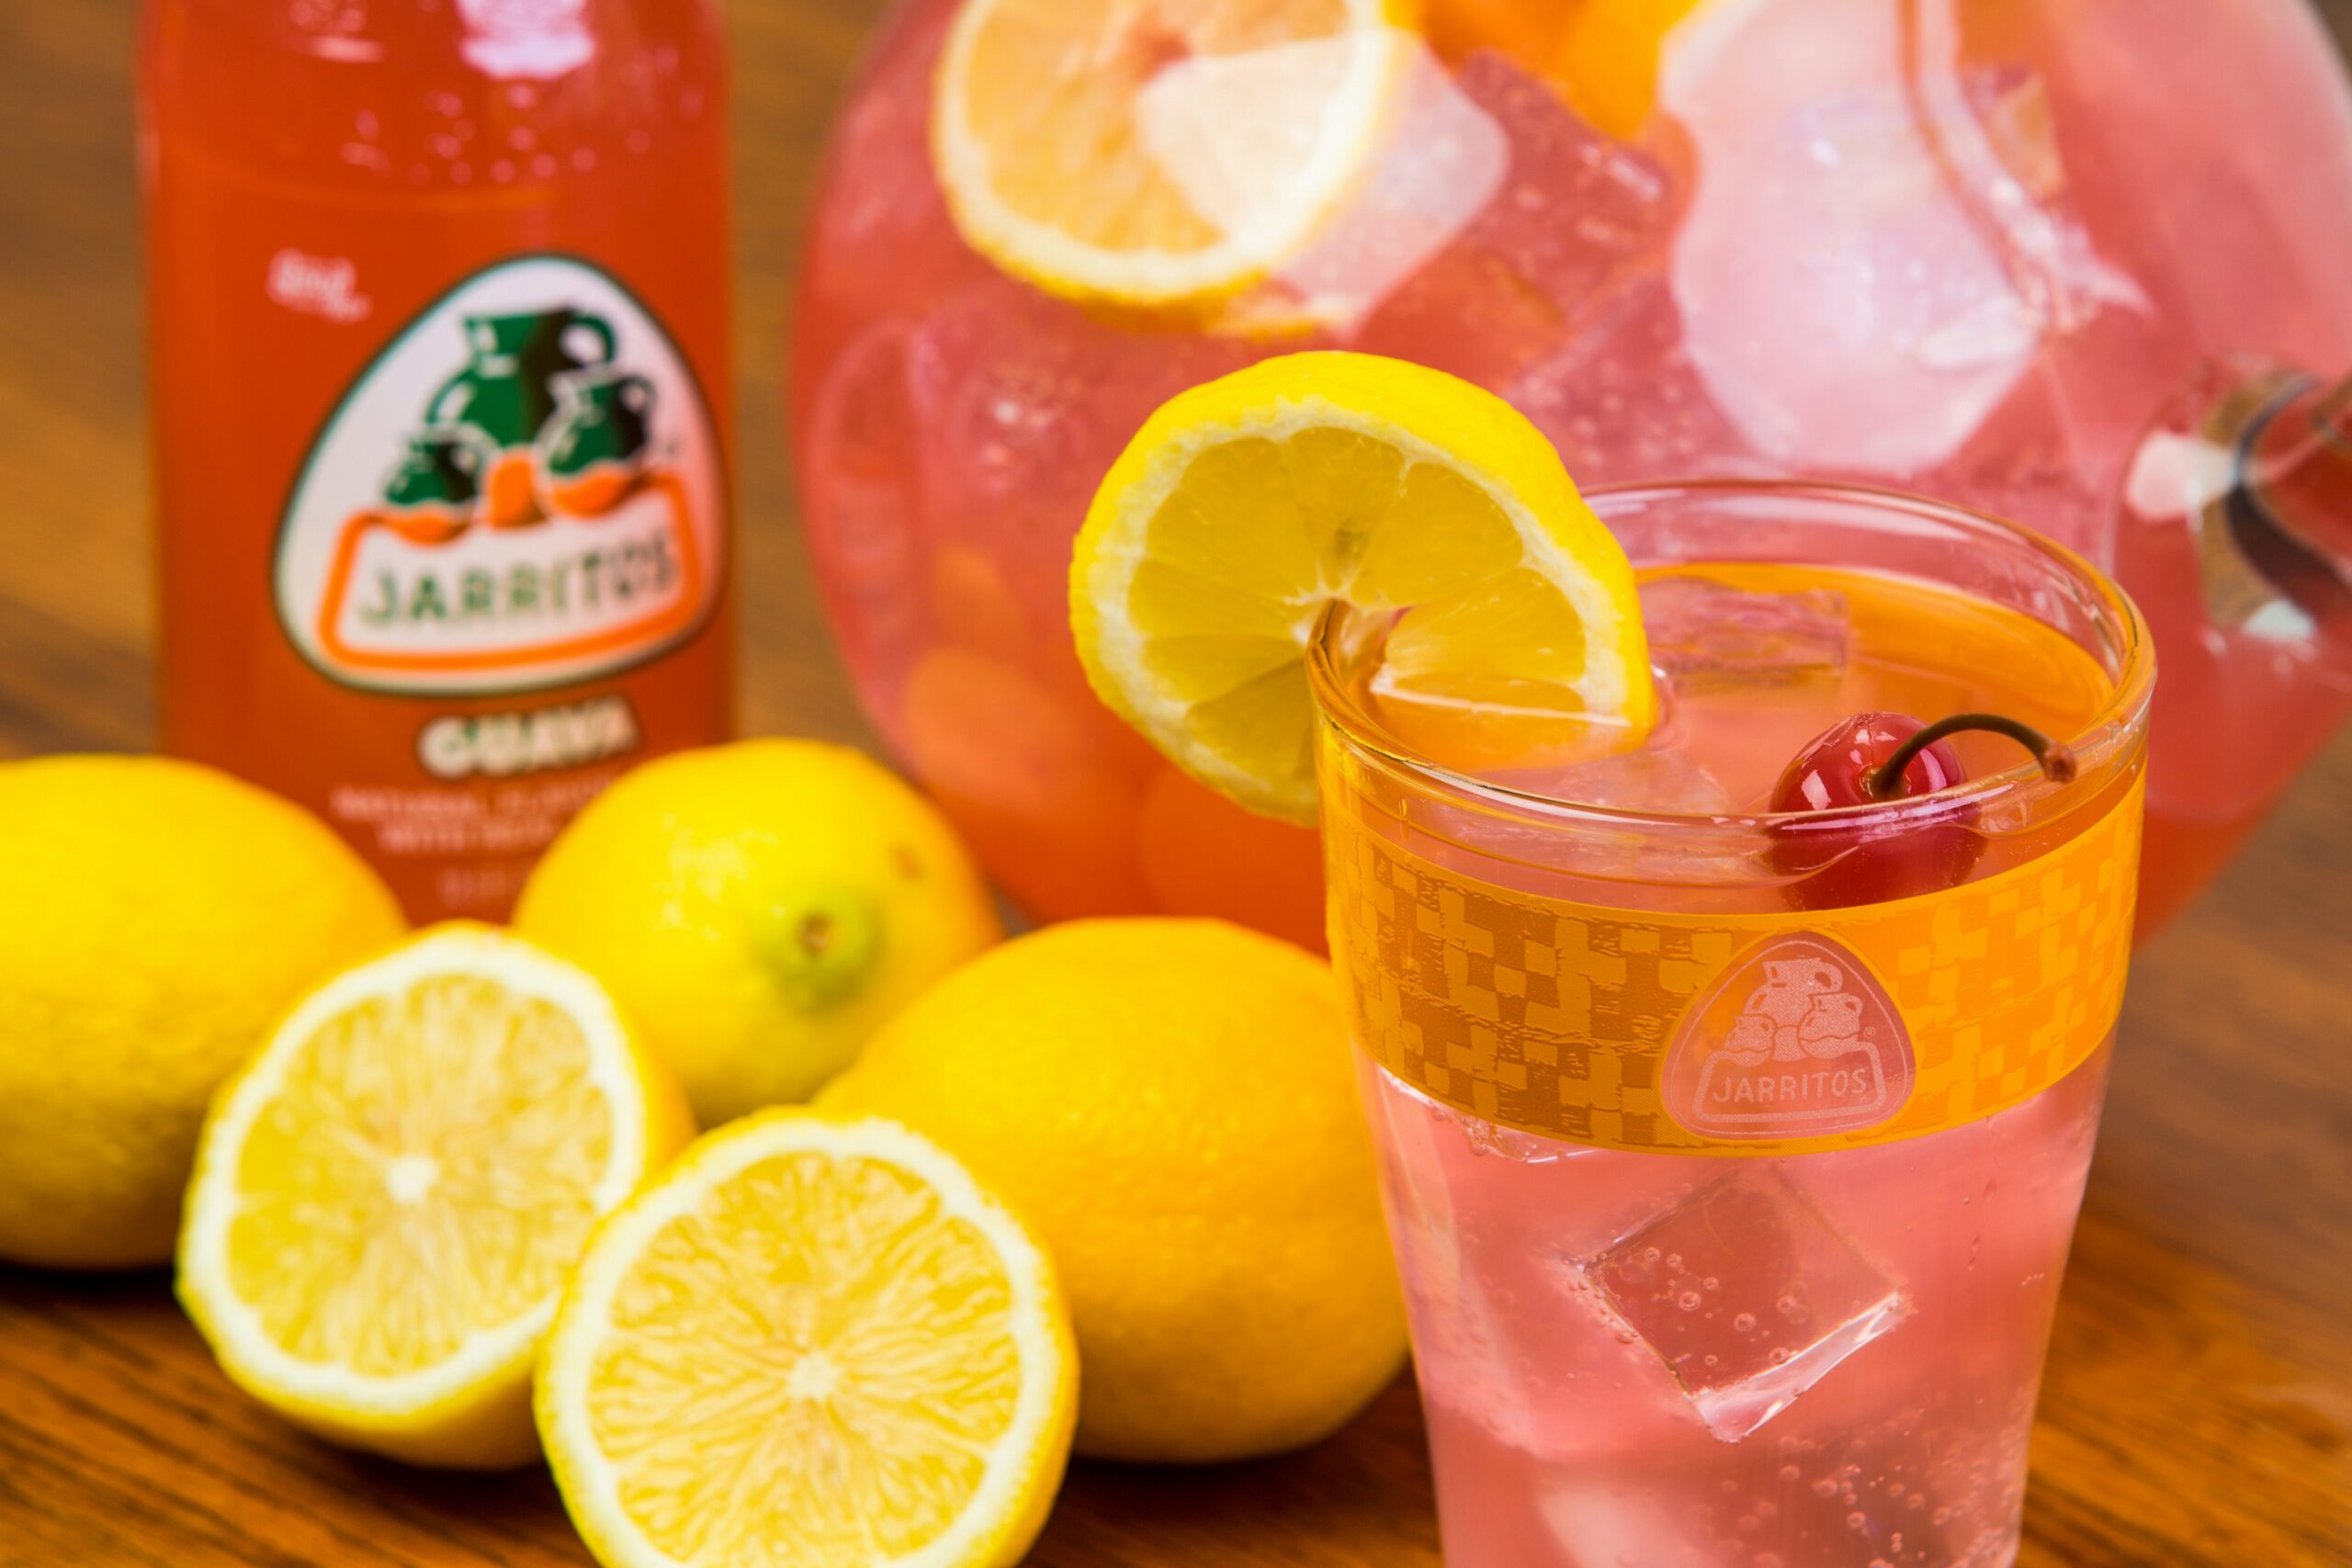 This lemonade is the perfect tart cherry juice mocktail for sleep and relaxation. Pictured: lemonade